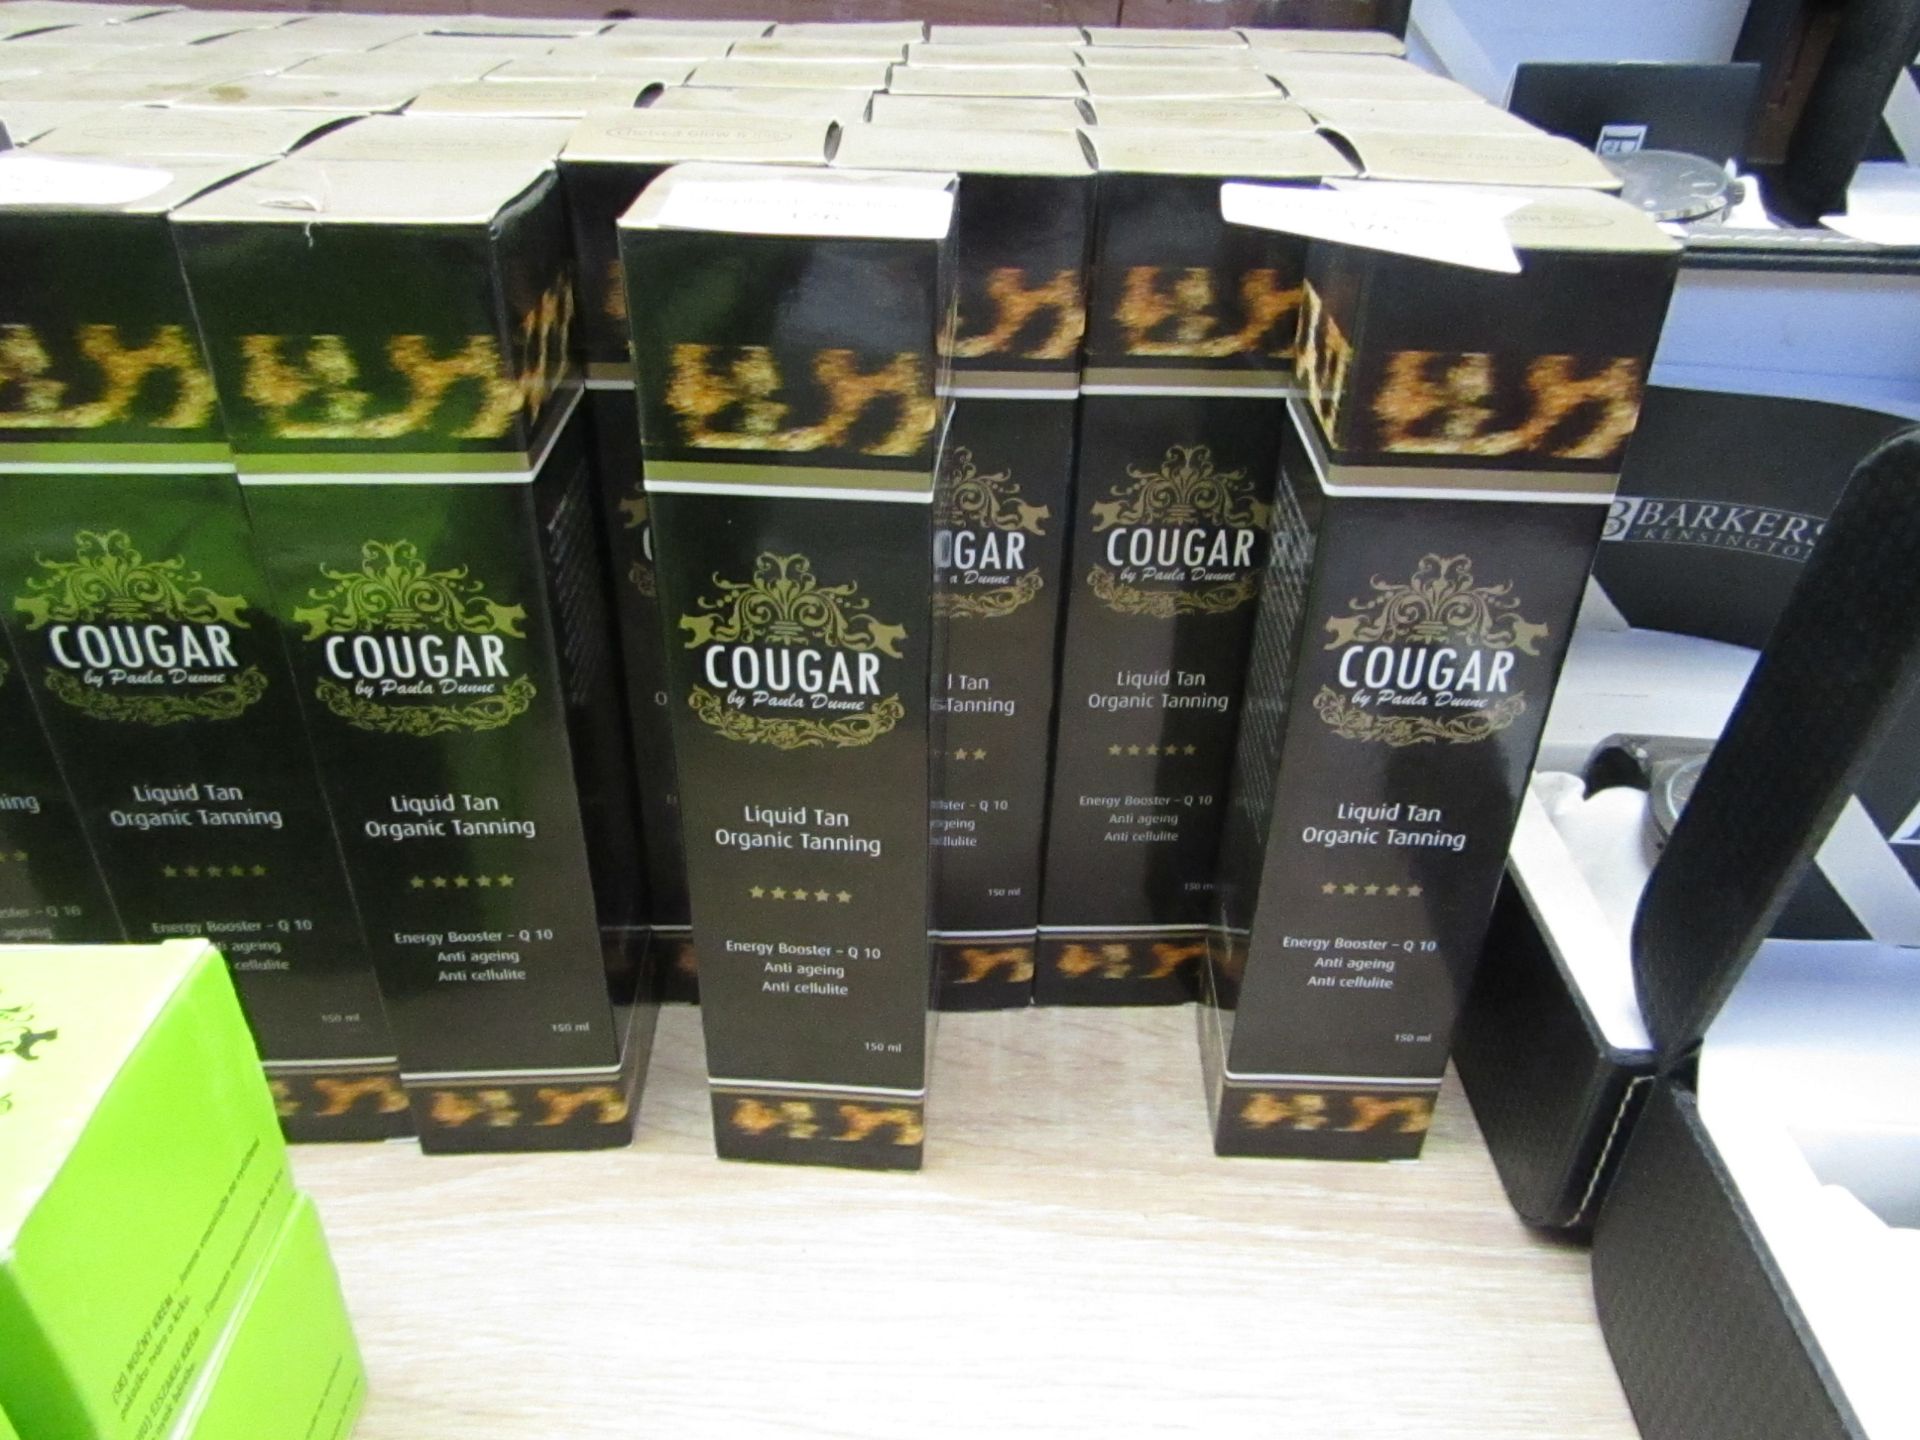 5 x 150ml canisters of Cougar organic spray tan with energy booster, Shades are Chelsea Glow & Essex